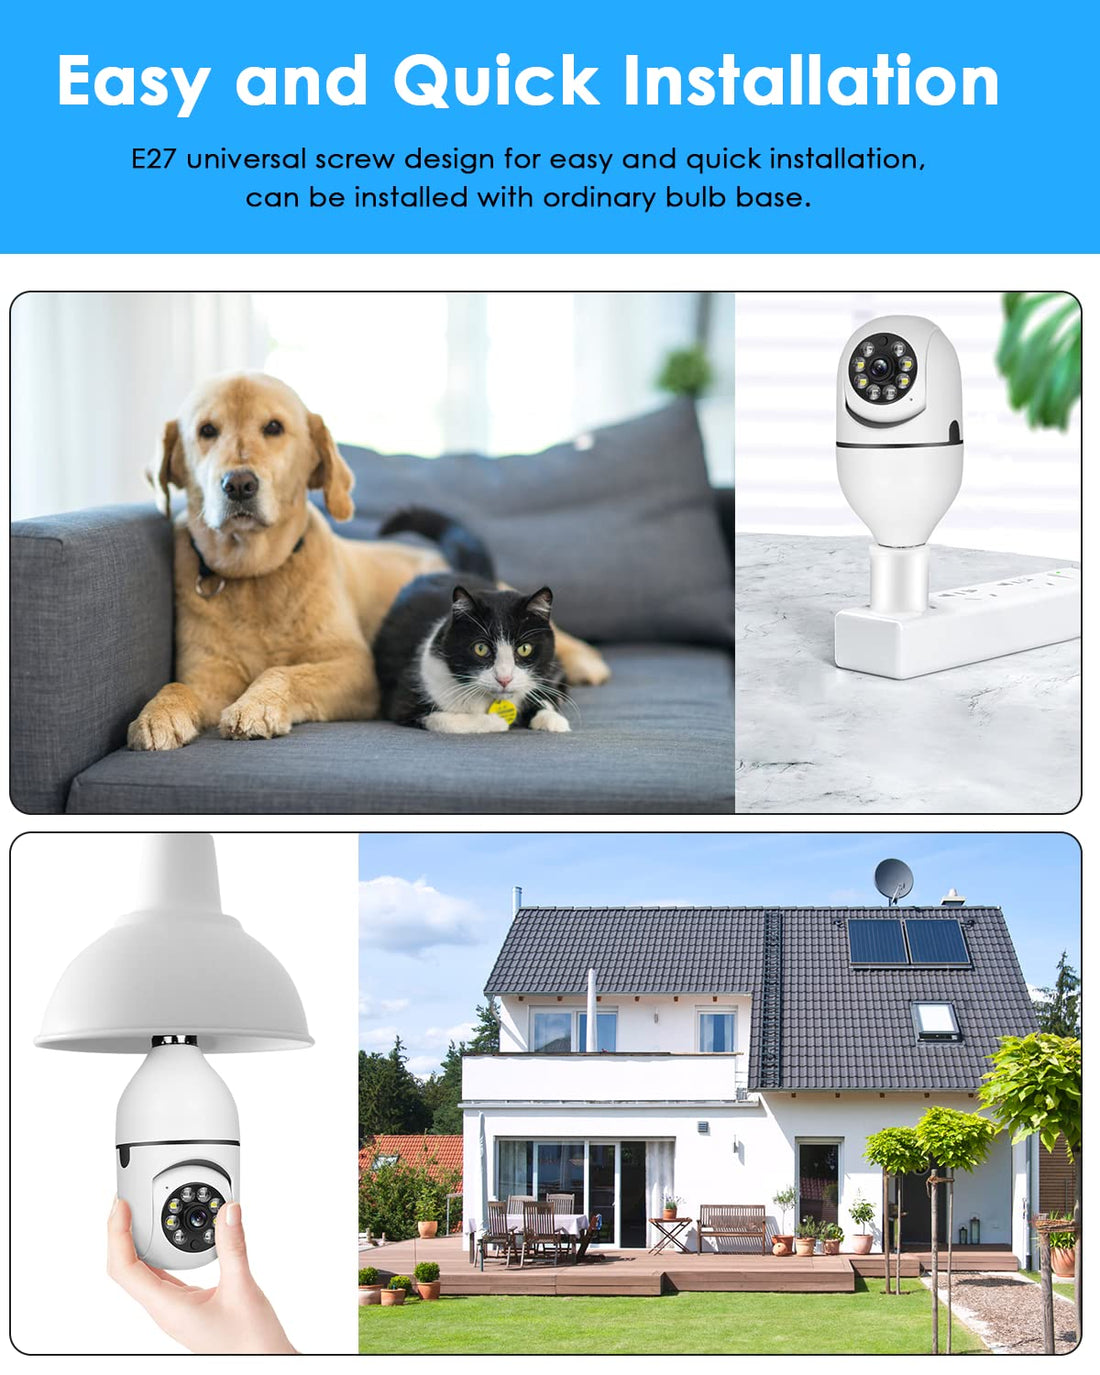 OFYOO Light Bulb Security Camera Wireless Outdoor Indoor 2.4G/5G WiFi Cameras for Home 360° Panoramic Motion Detection and Alarm Two-Way Audio Based E27 Socket